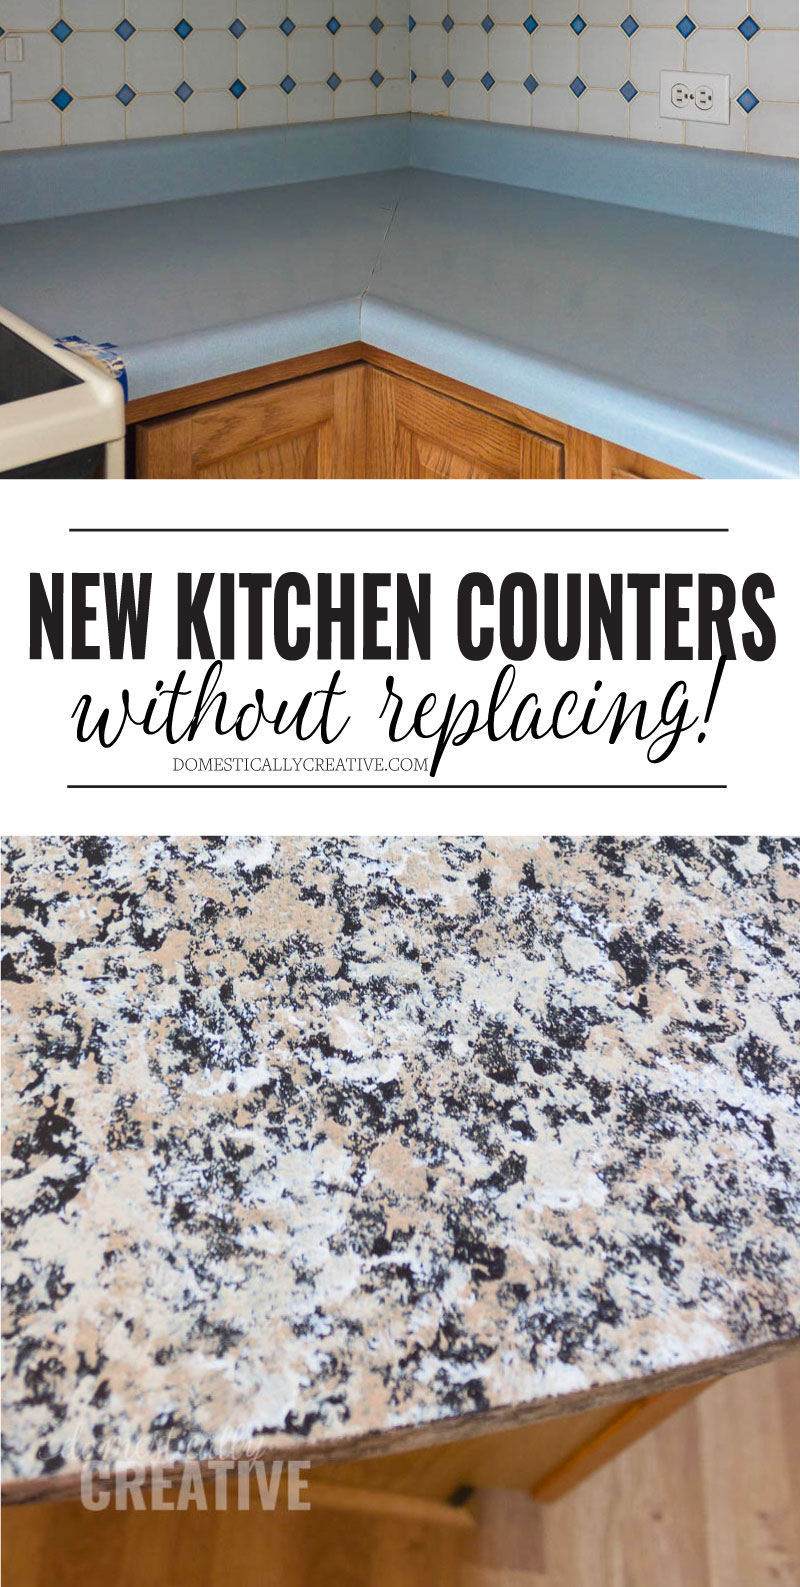 How to Update Kitchen Counters without replacing them